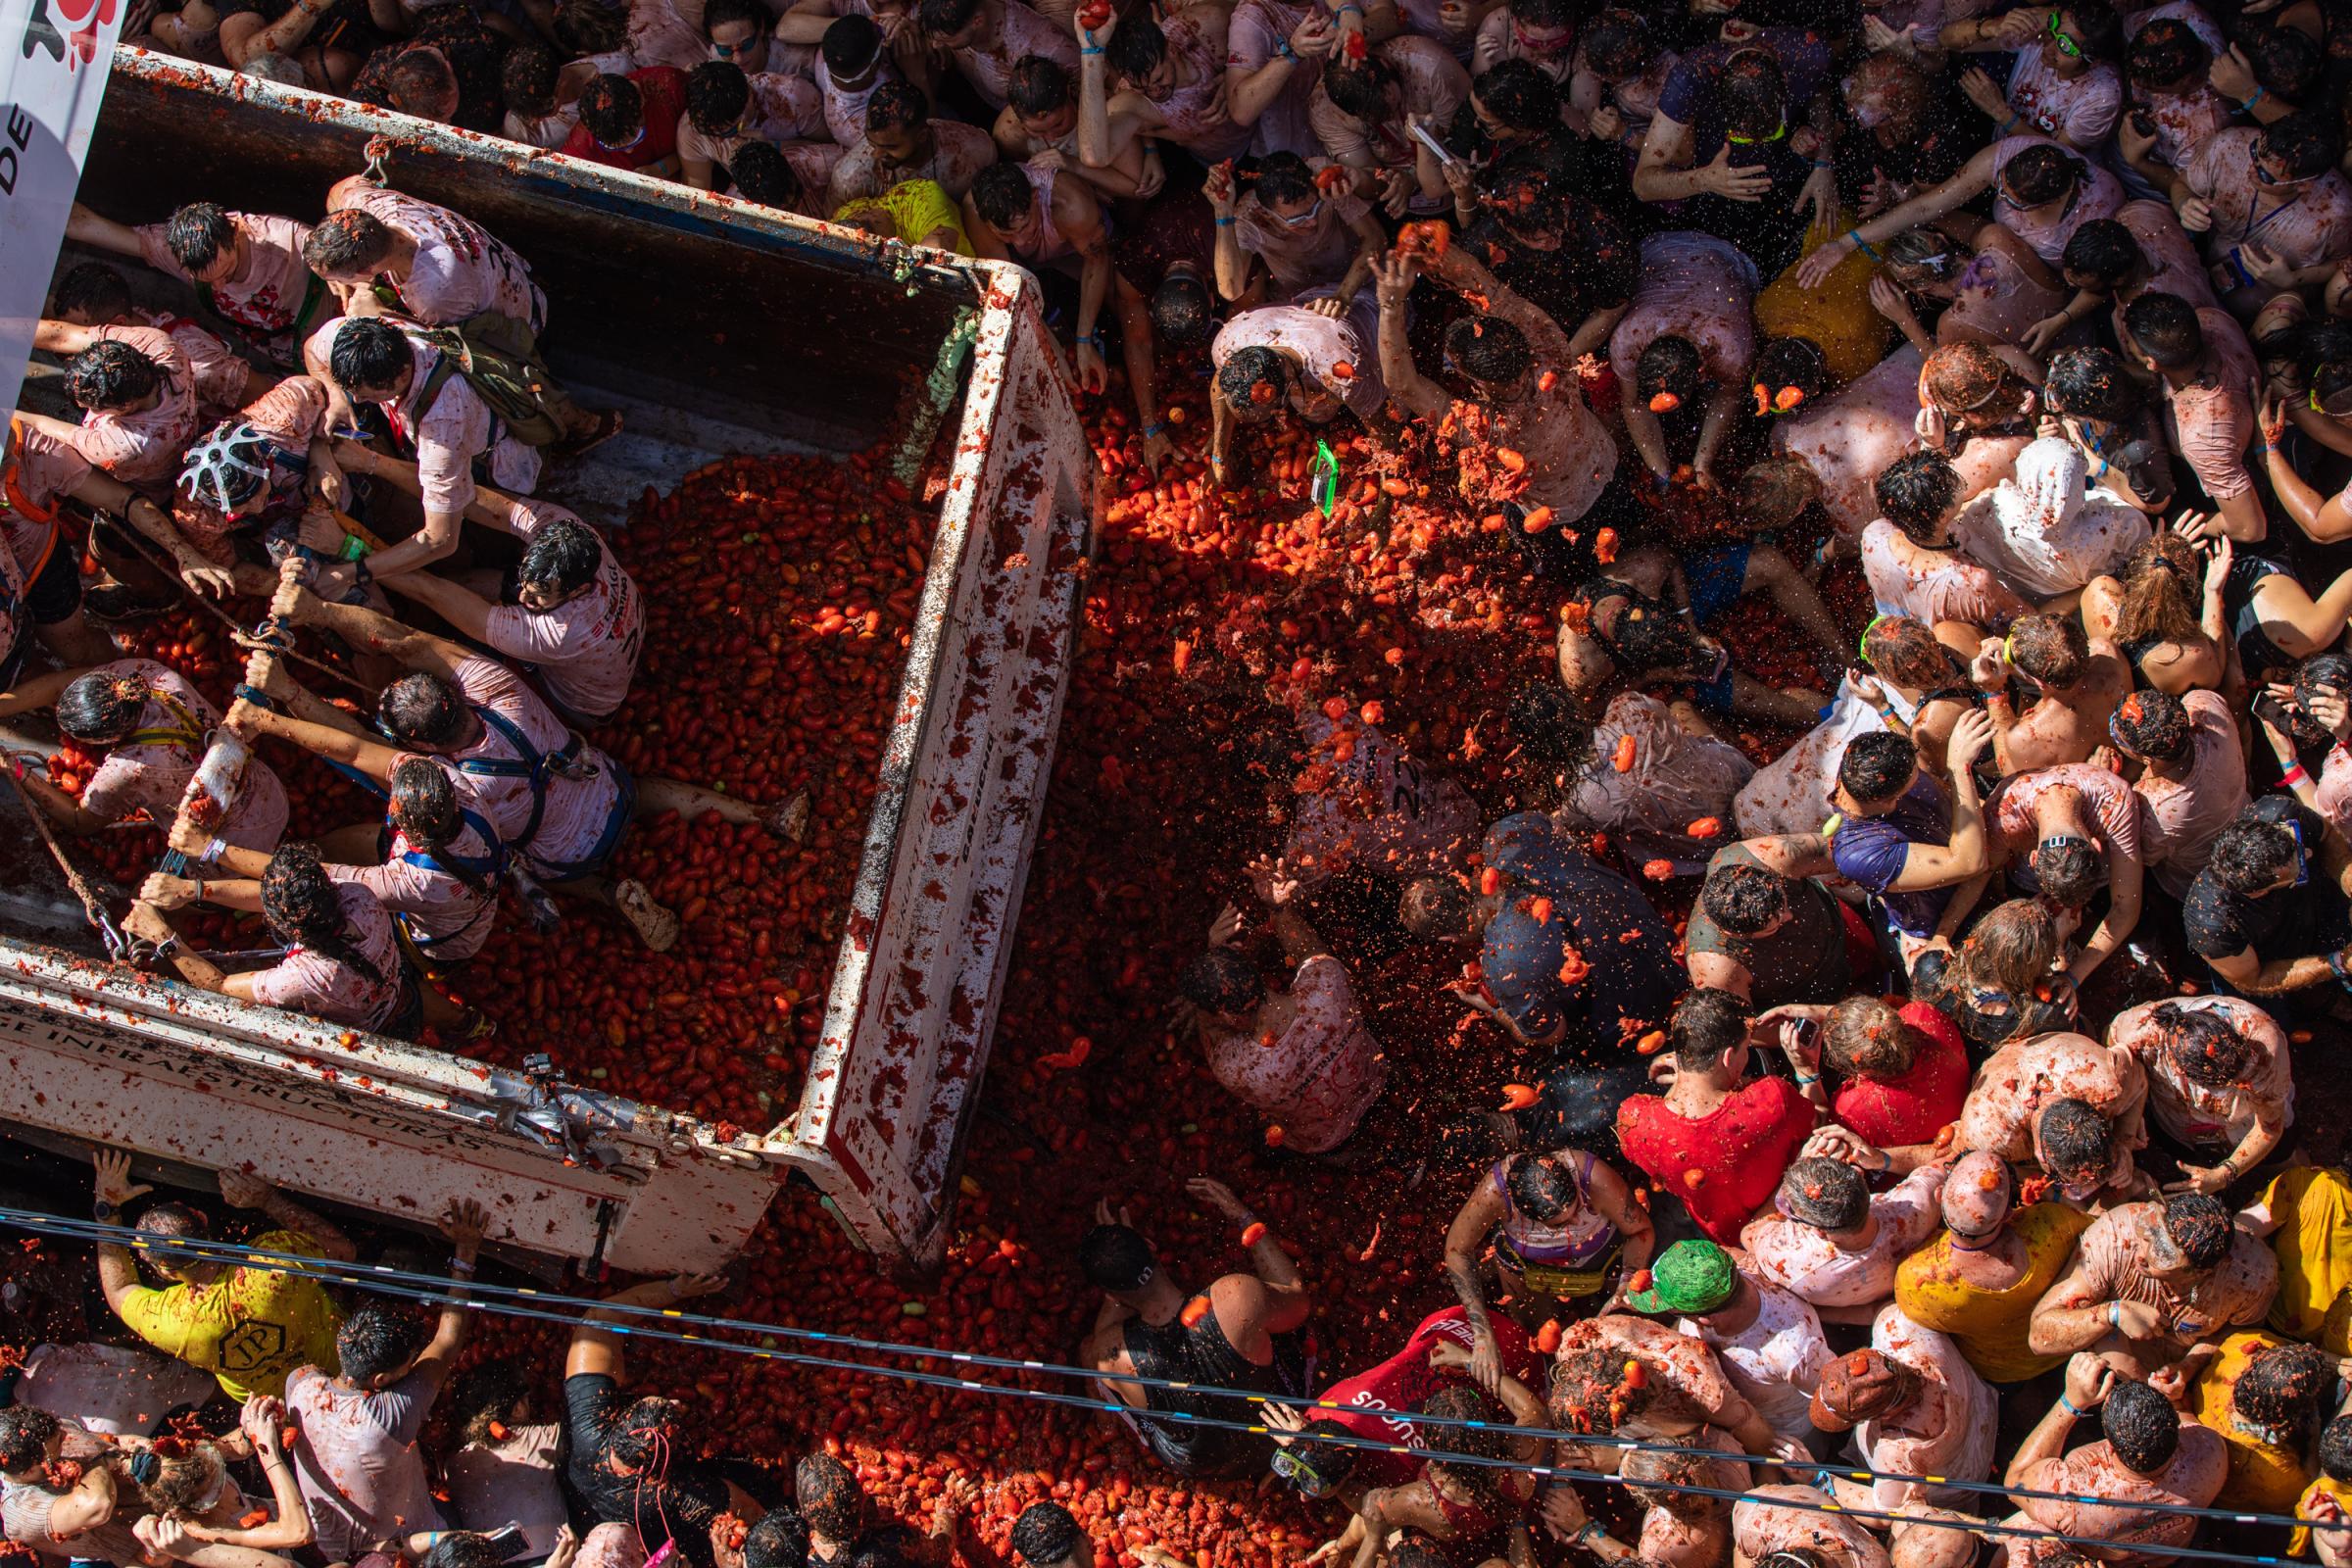 Spain's Tomato Throwing Festival Returns After Covid Hiatus For The 75th Edition - BUNOL, SPAIN - AUGUST 31: One of the trucks full of...